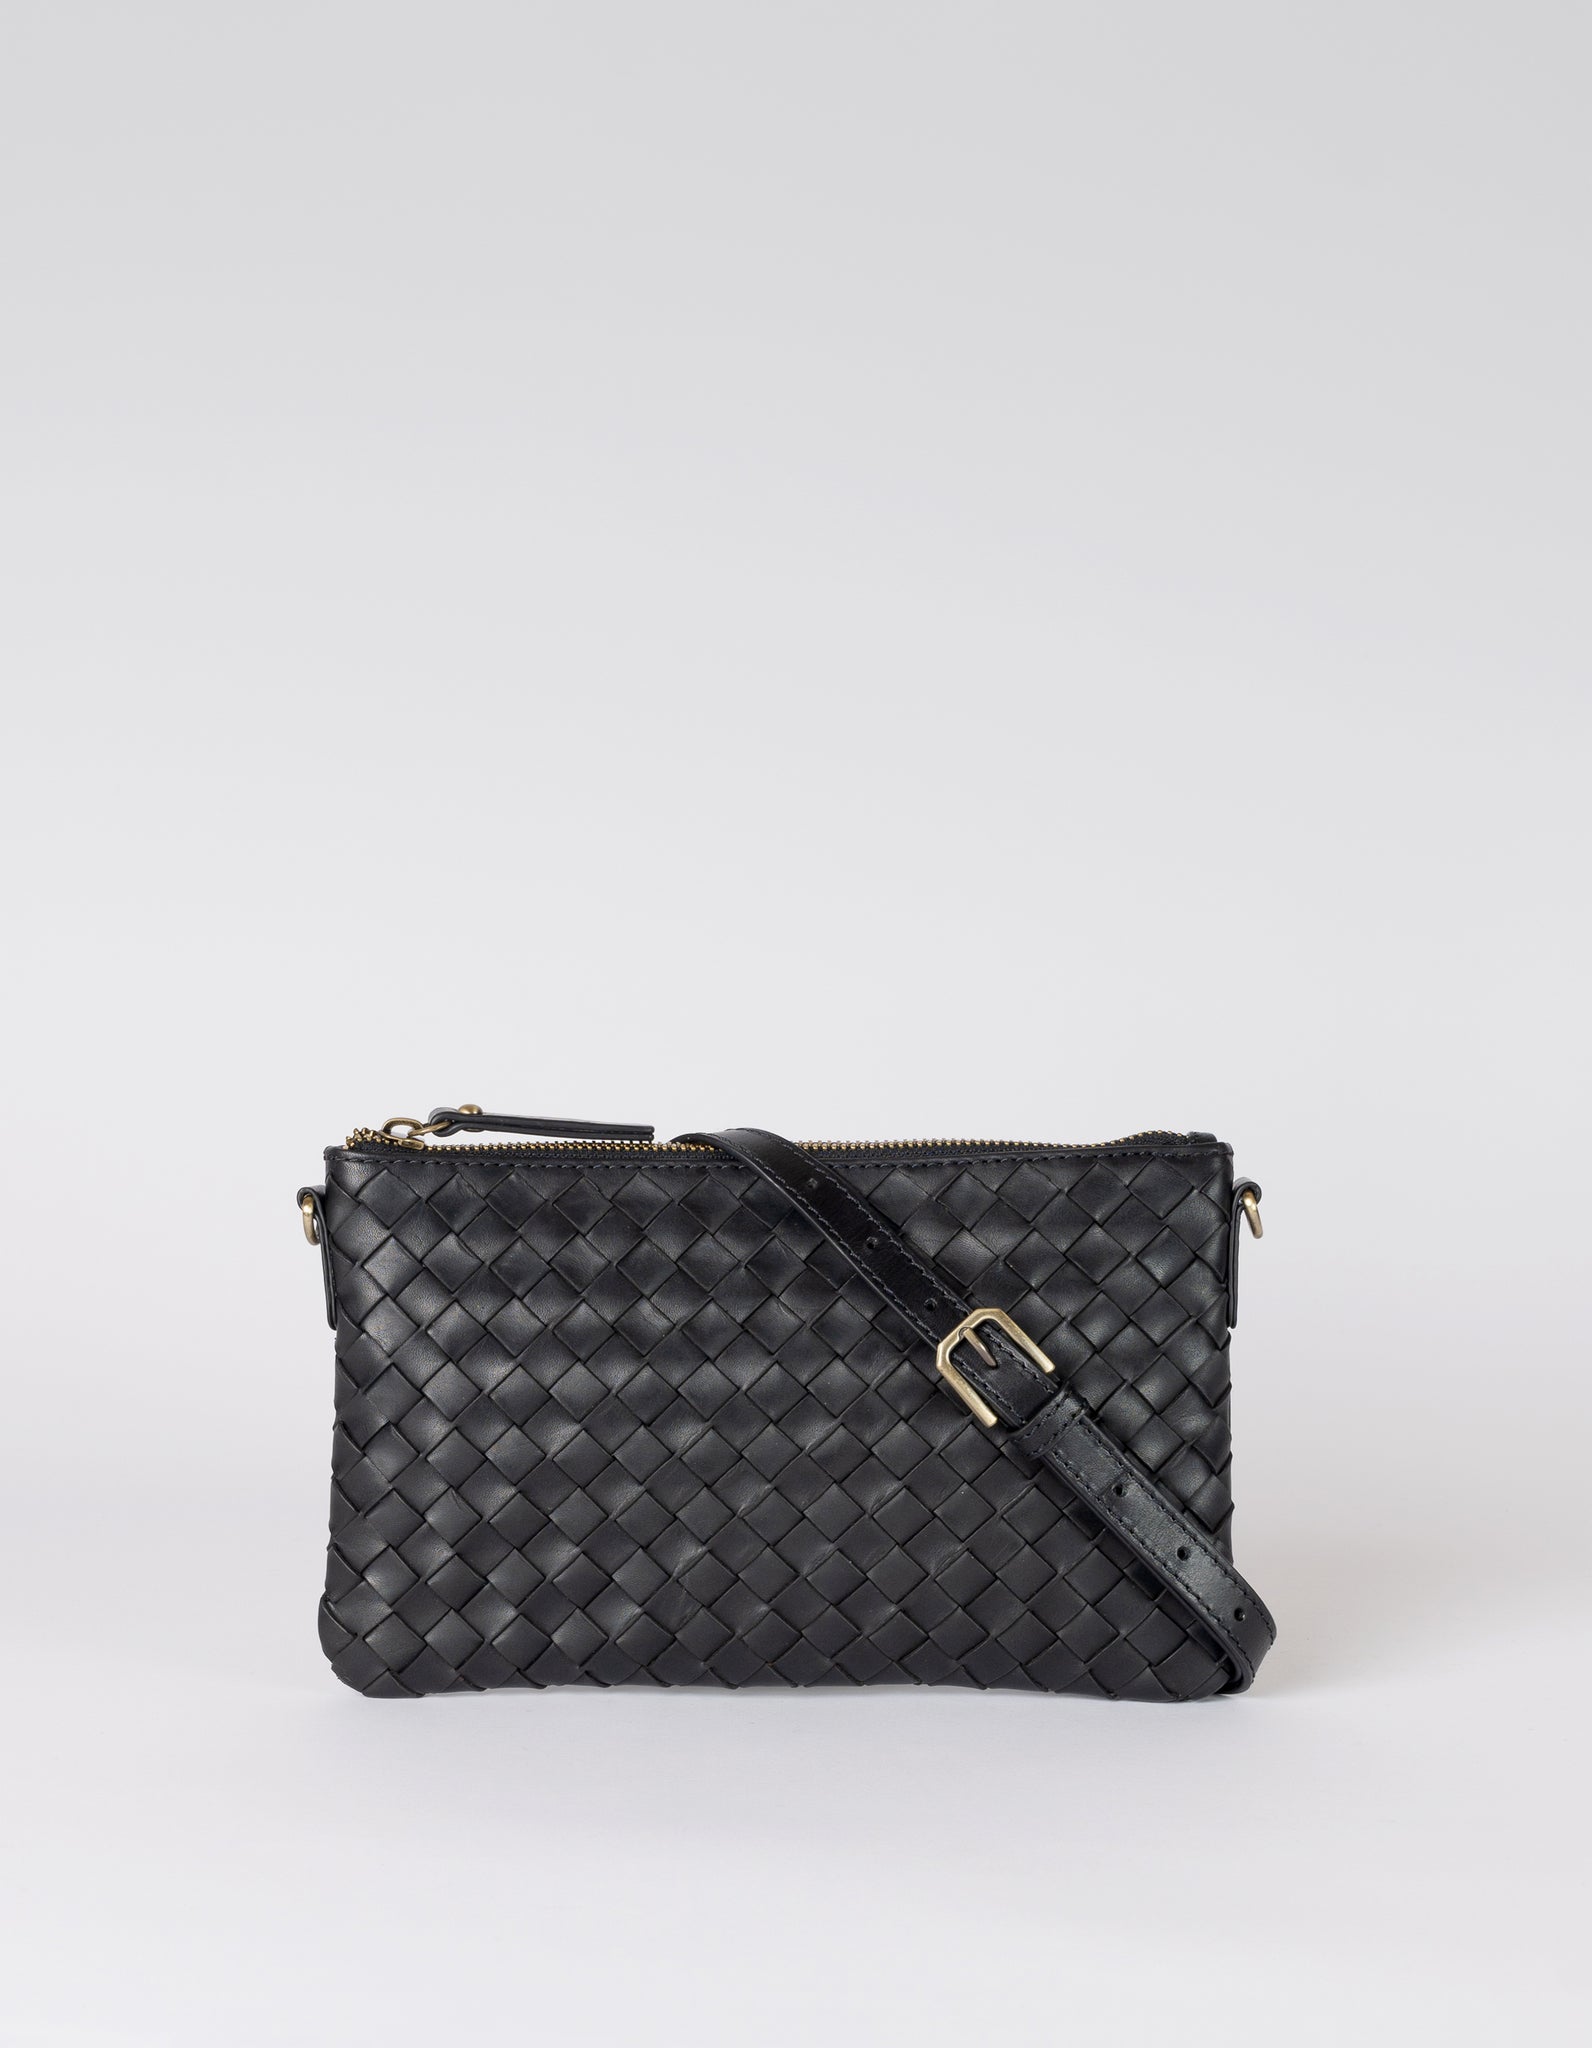 Lexi - Black Woven Classic Leather